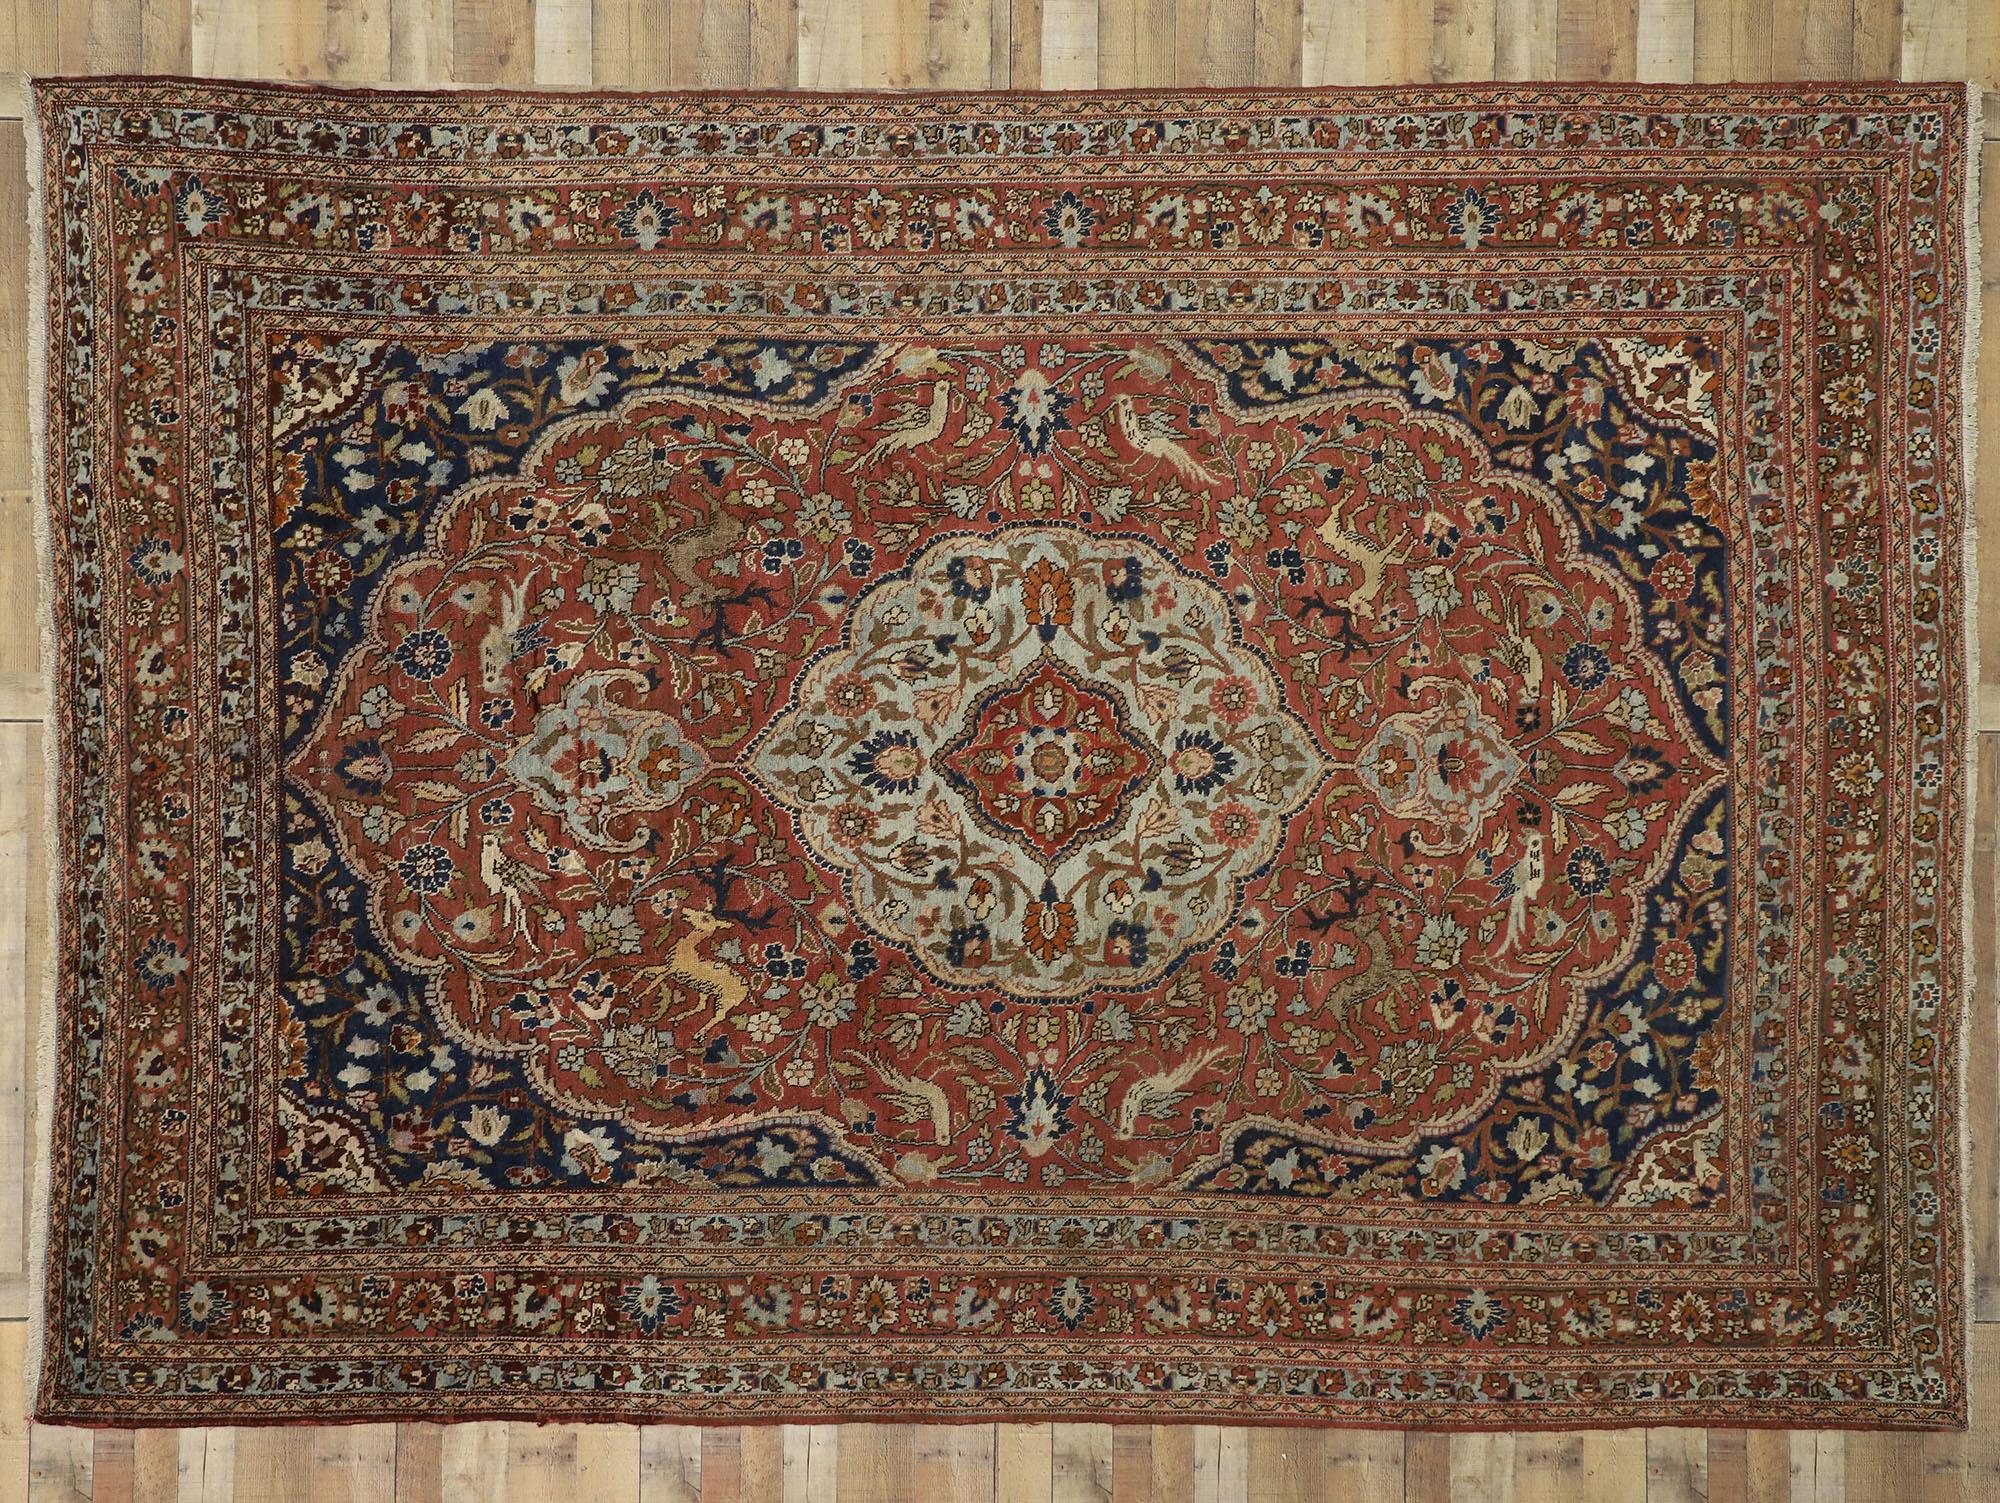 Antique Persian Tabriz Palace Size Rug with Arts & Crafts Renaissance Style For Sale 2